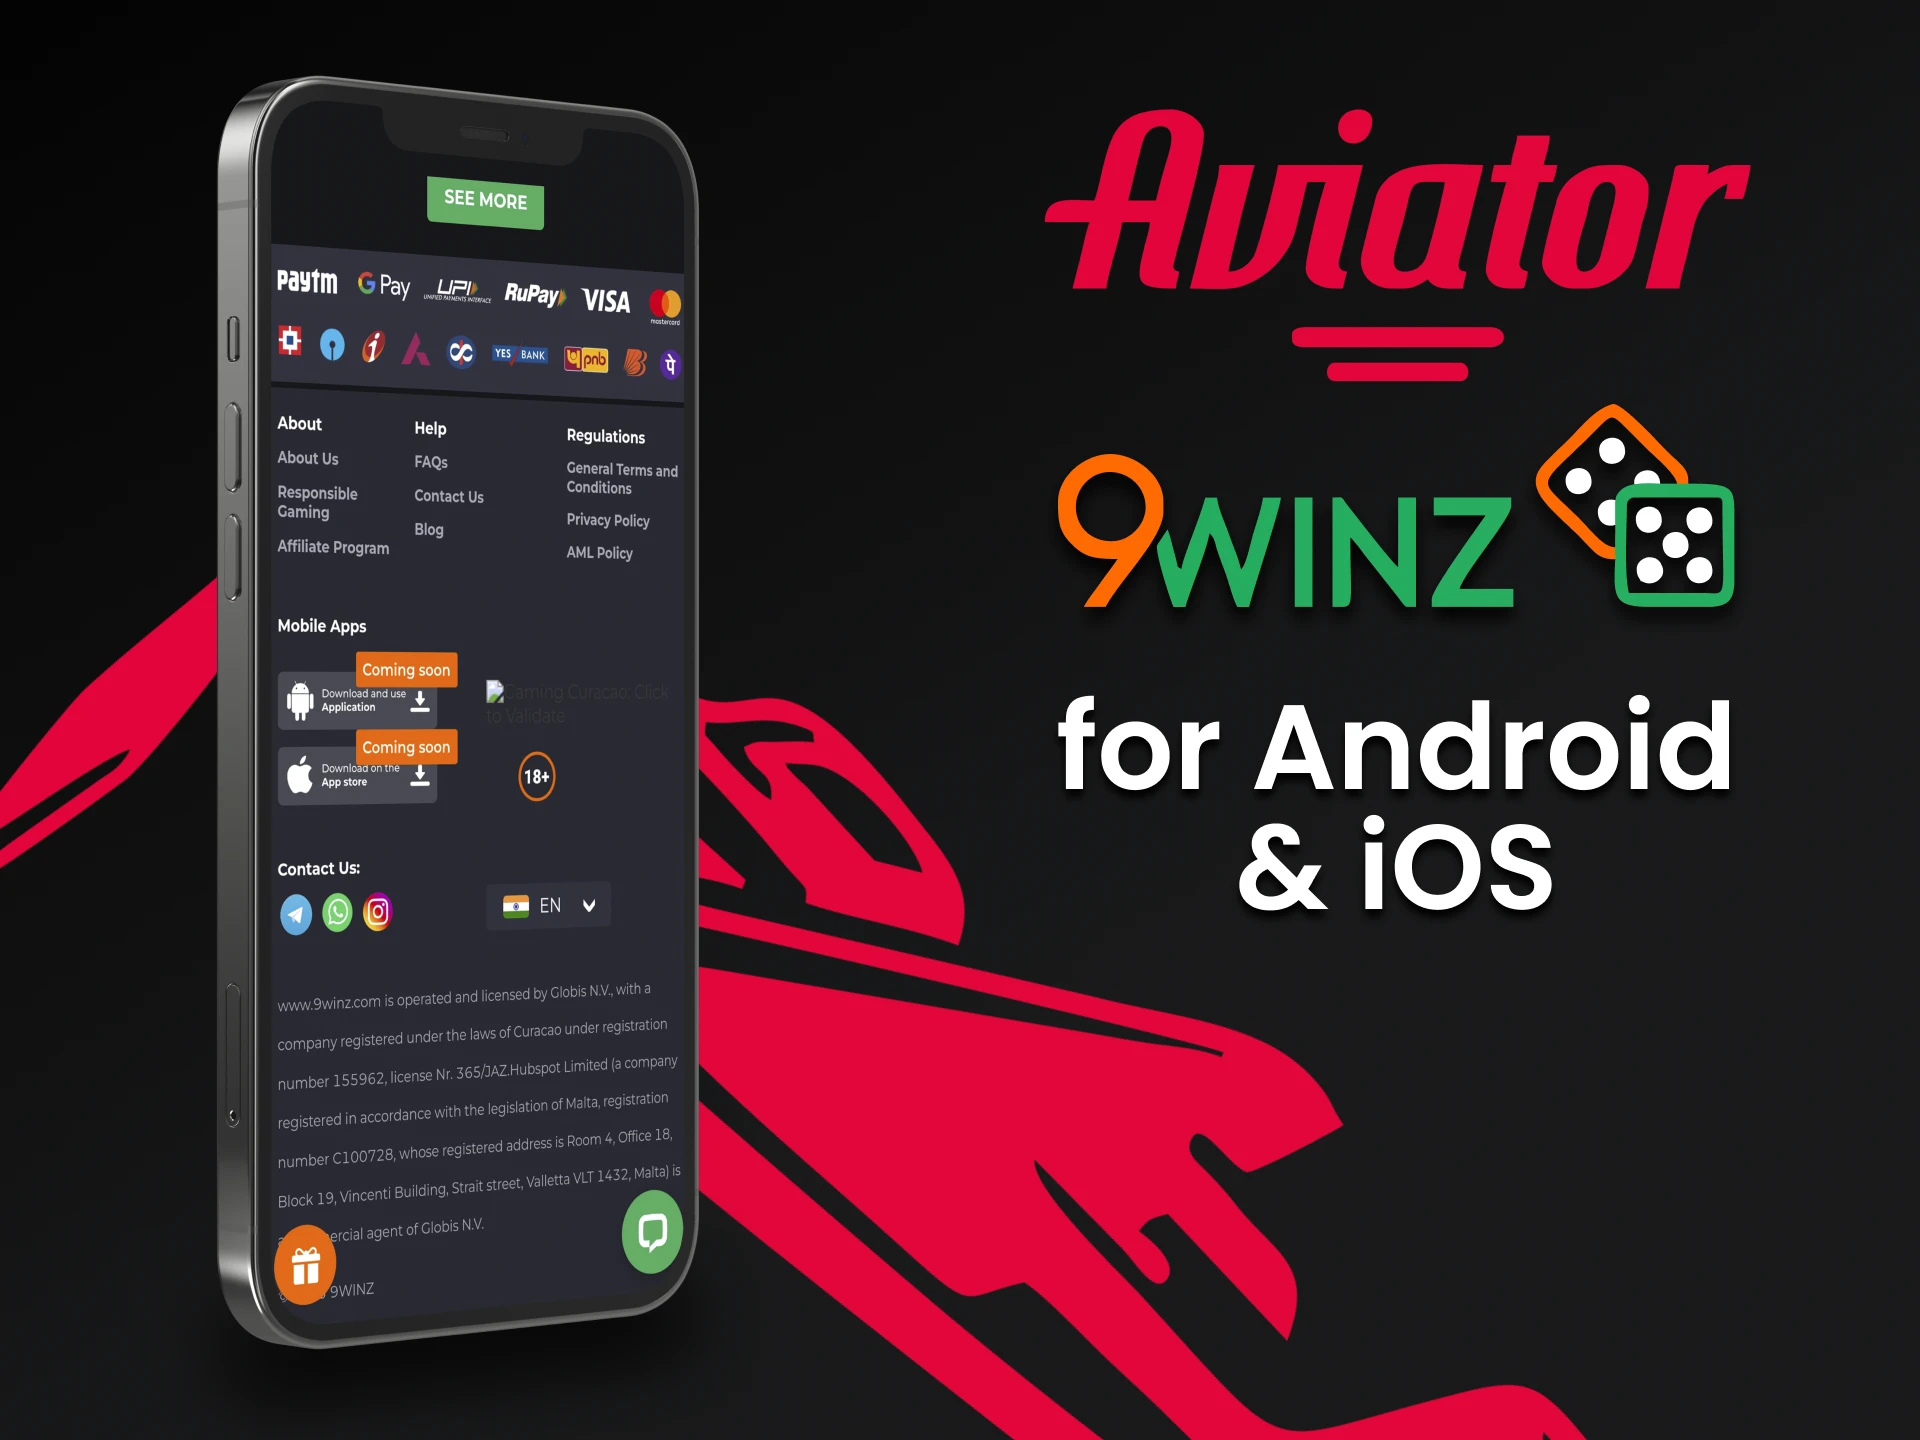 9winz apps for iOS and Android will be available in the near future.